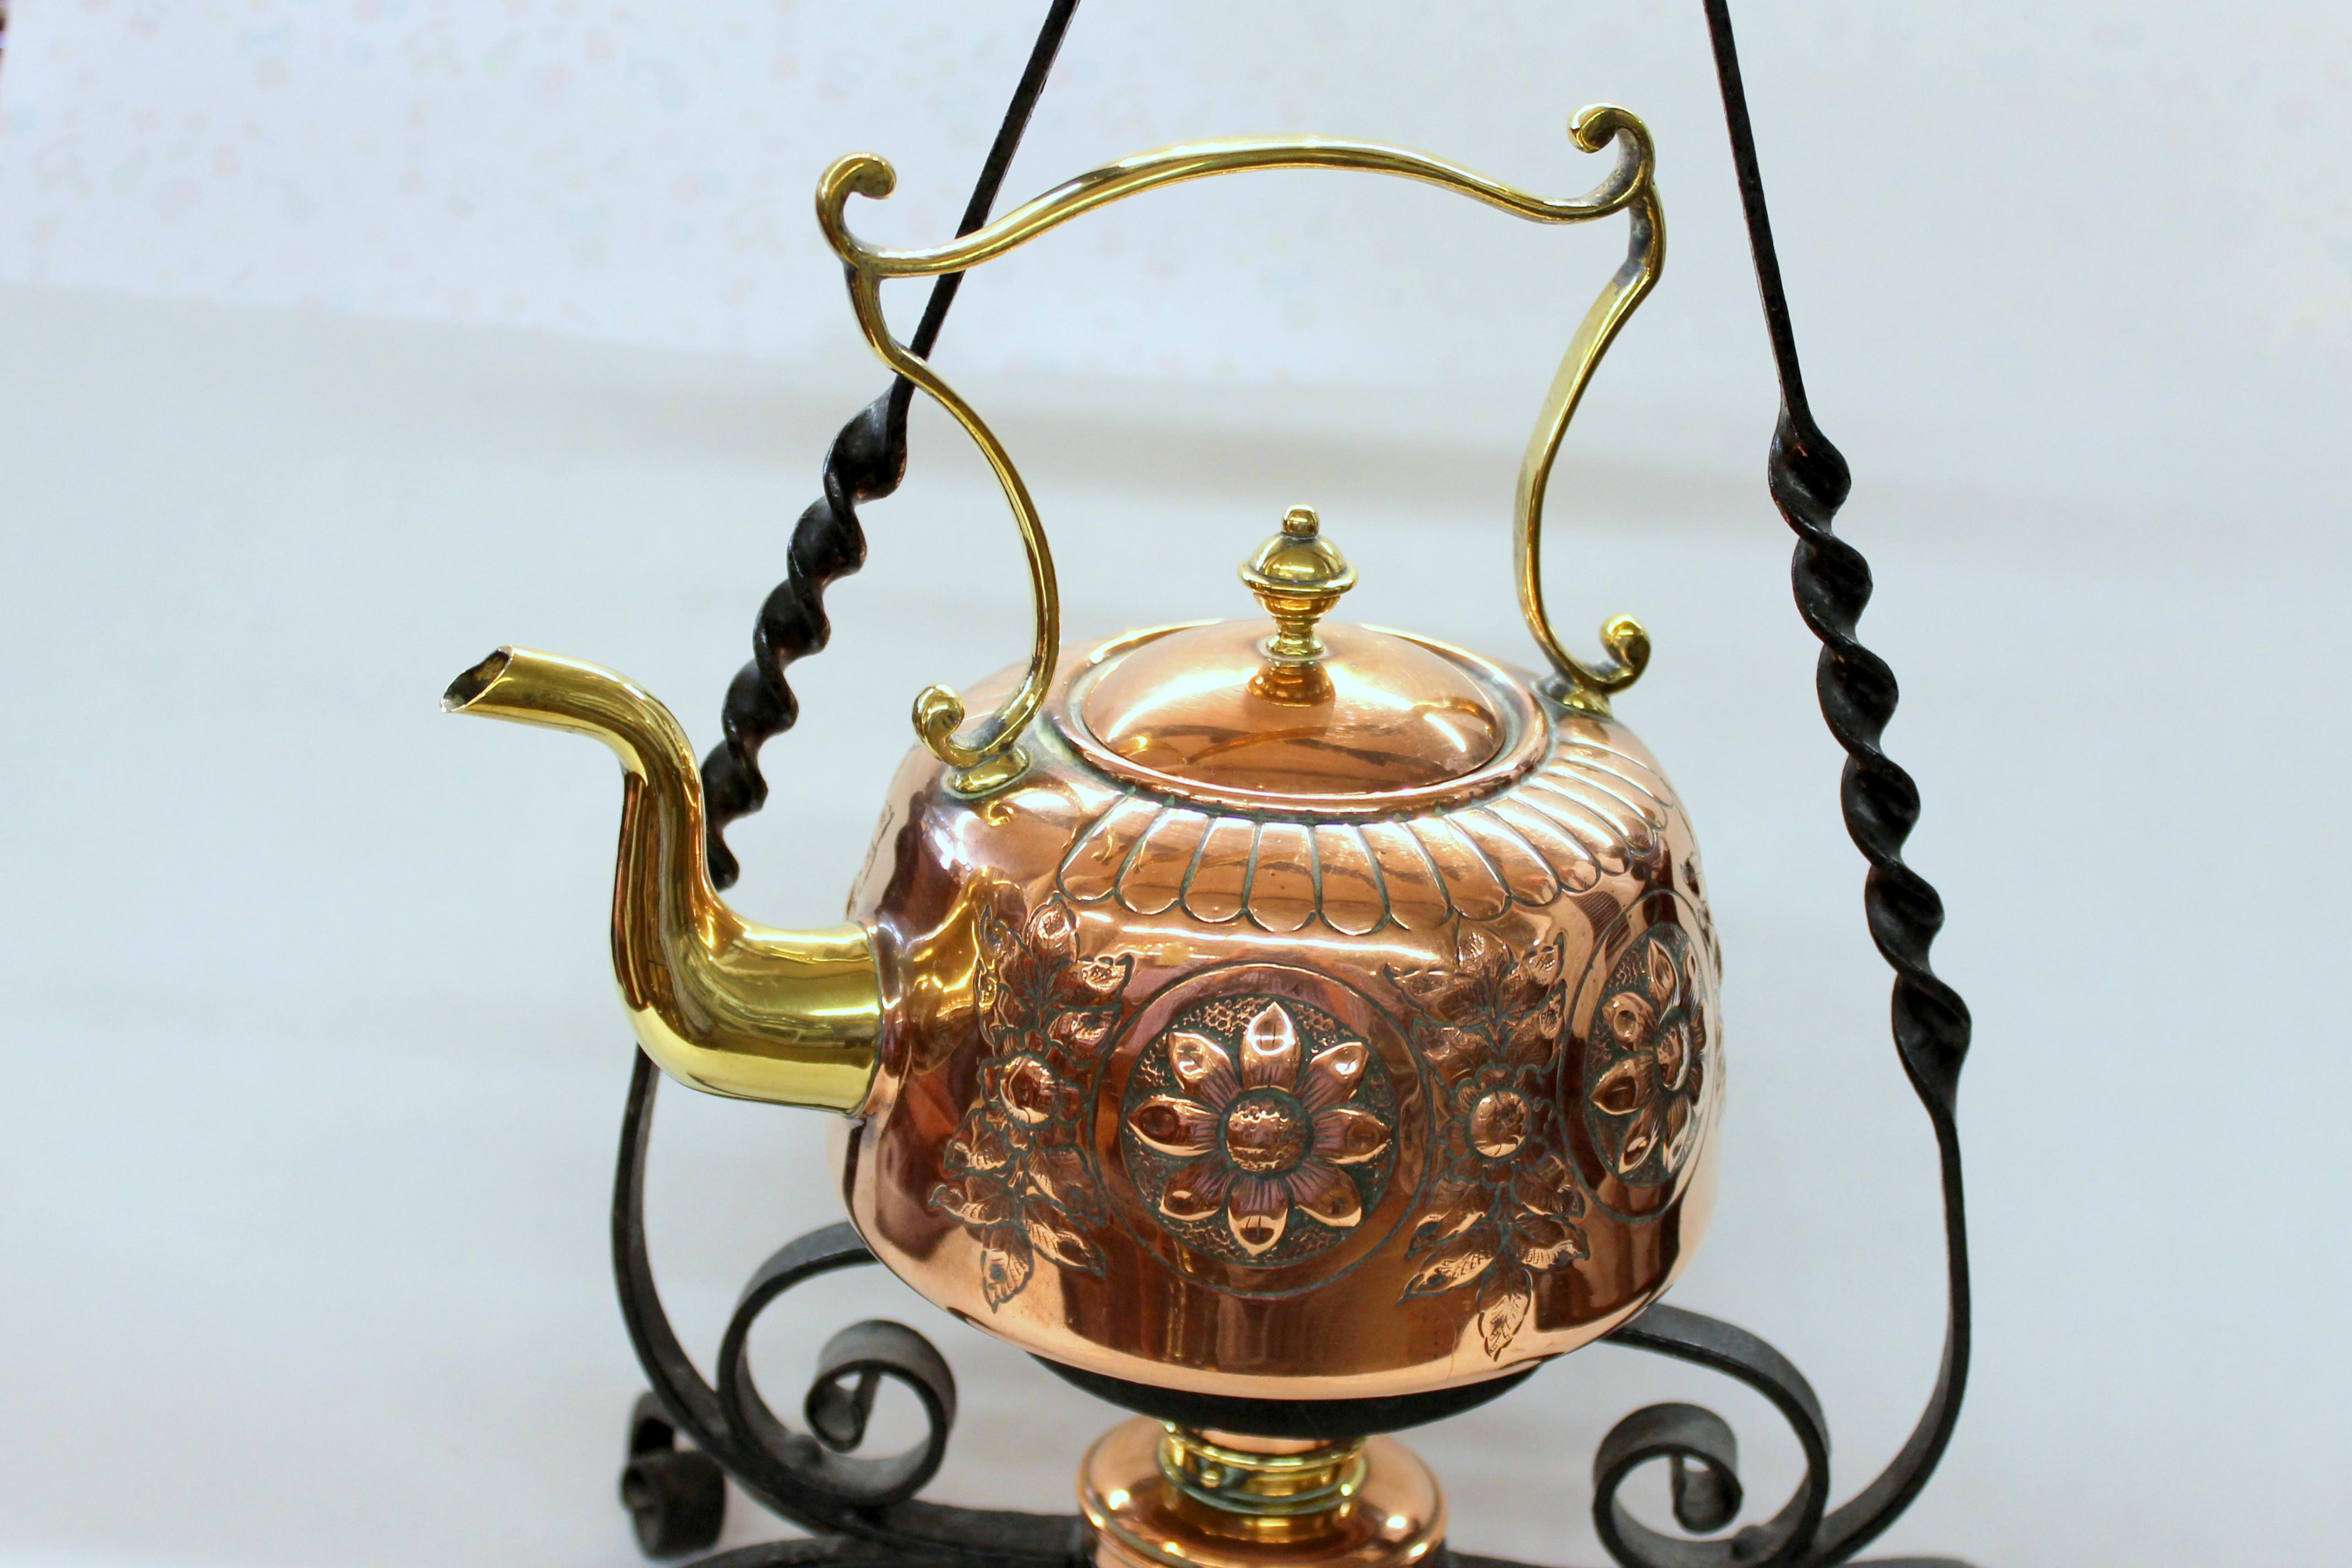 19th Century Antique English Hand Chased Copper and Brass Kettle on Wrought Iron Stand